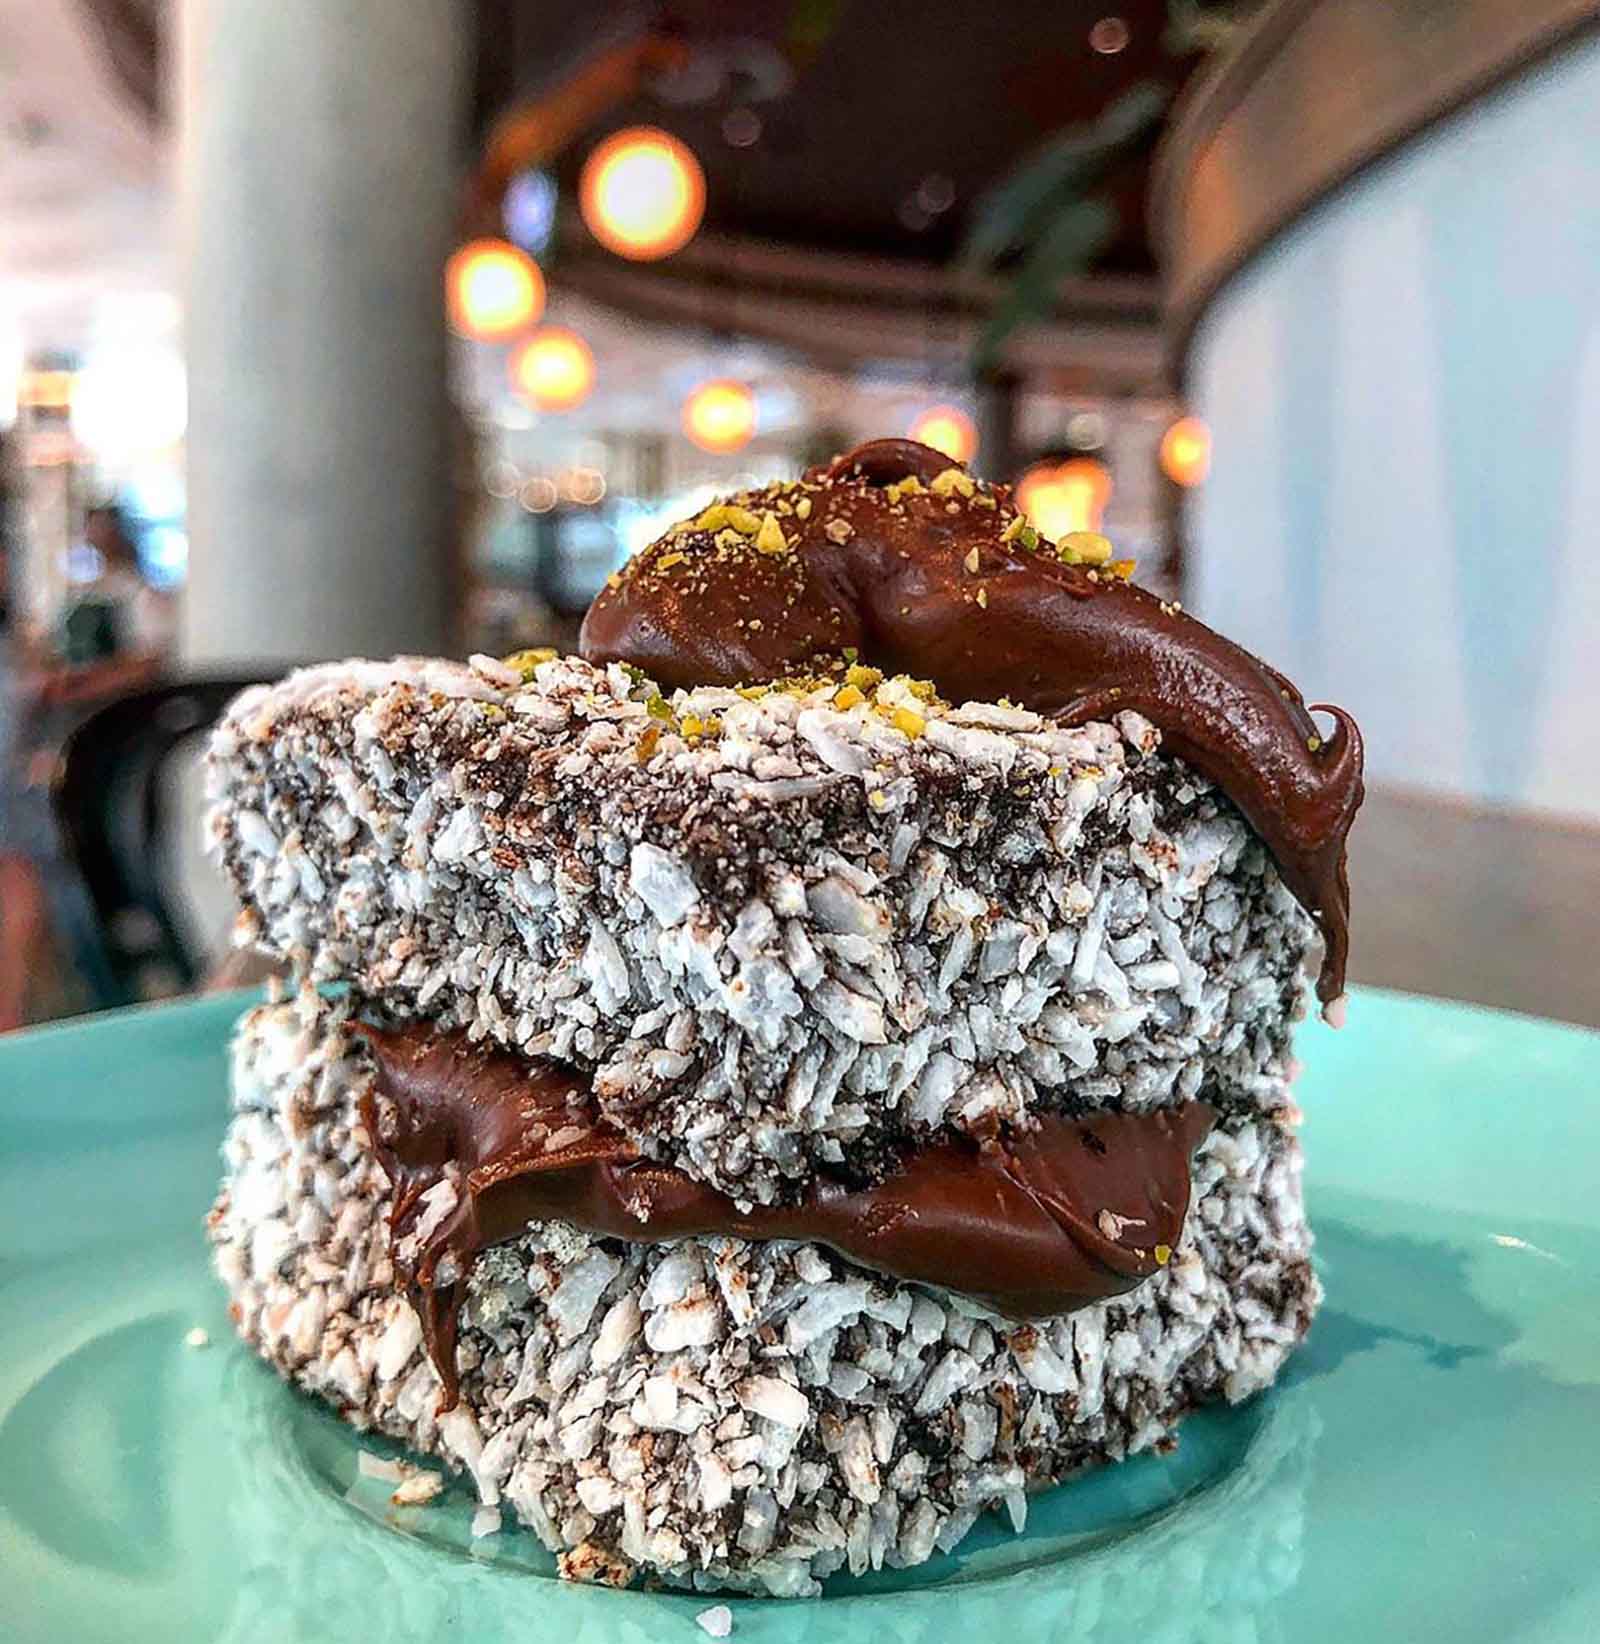 The Lord Lamington specialty, the Nutella baklava lamington | 7 things that would surprise you about The Lord Lamington